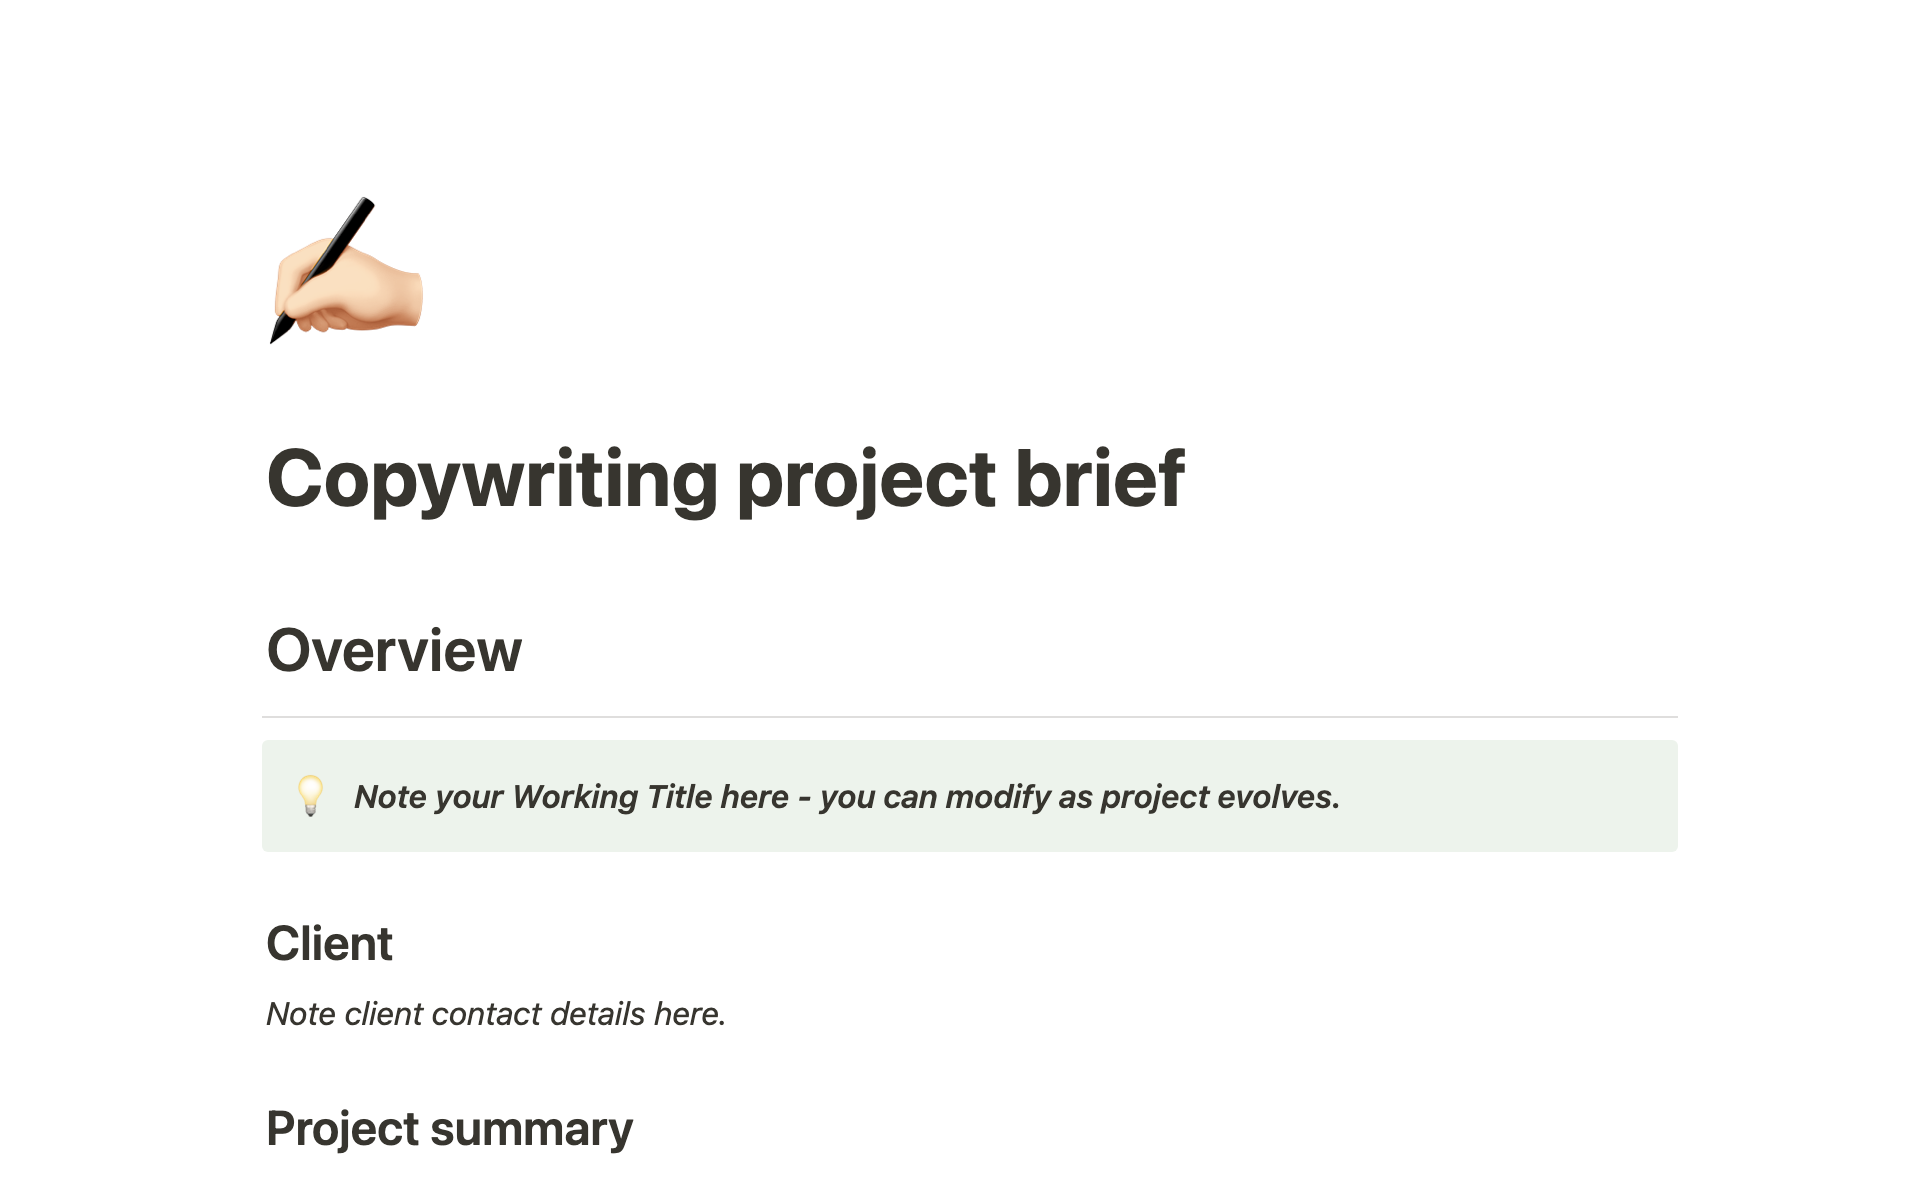 Everything you need to build a useful brief for a copywriting project, including prompts.